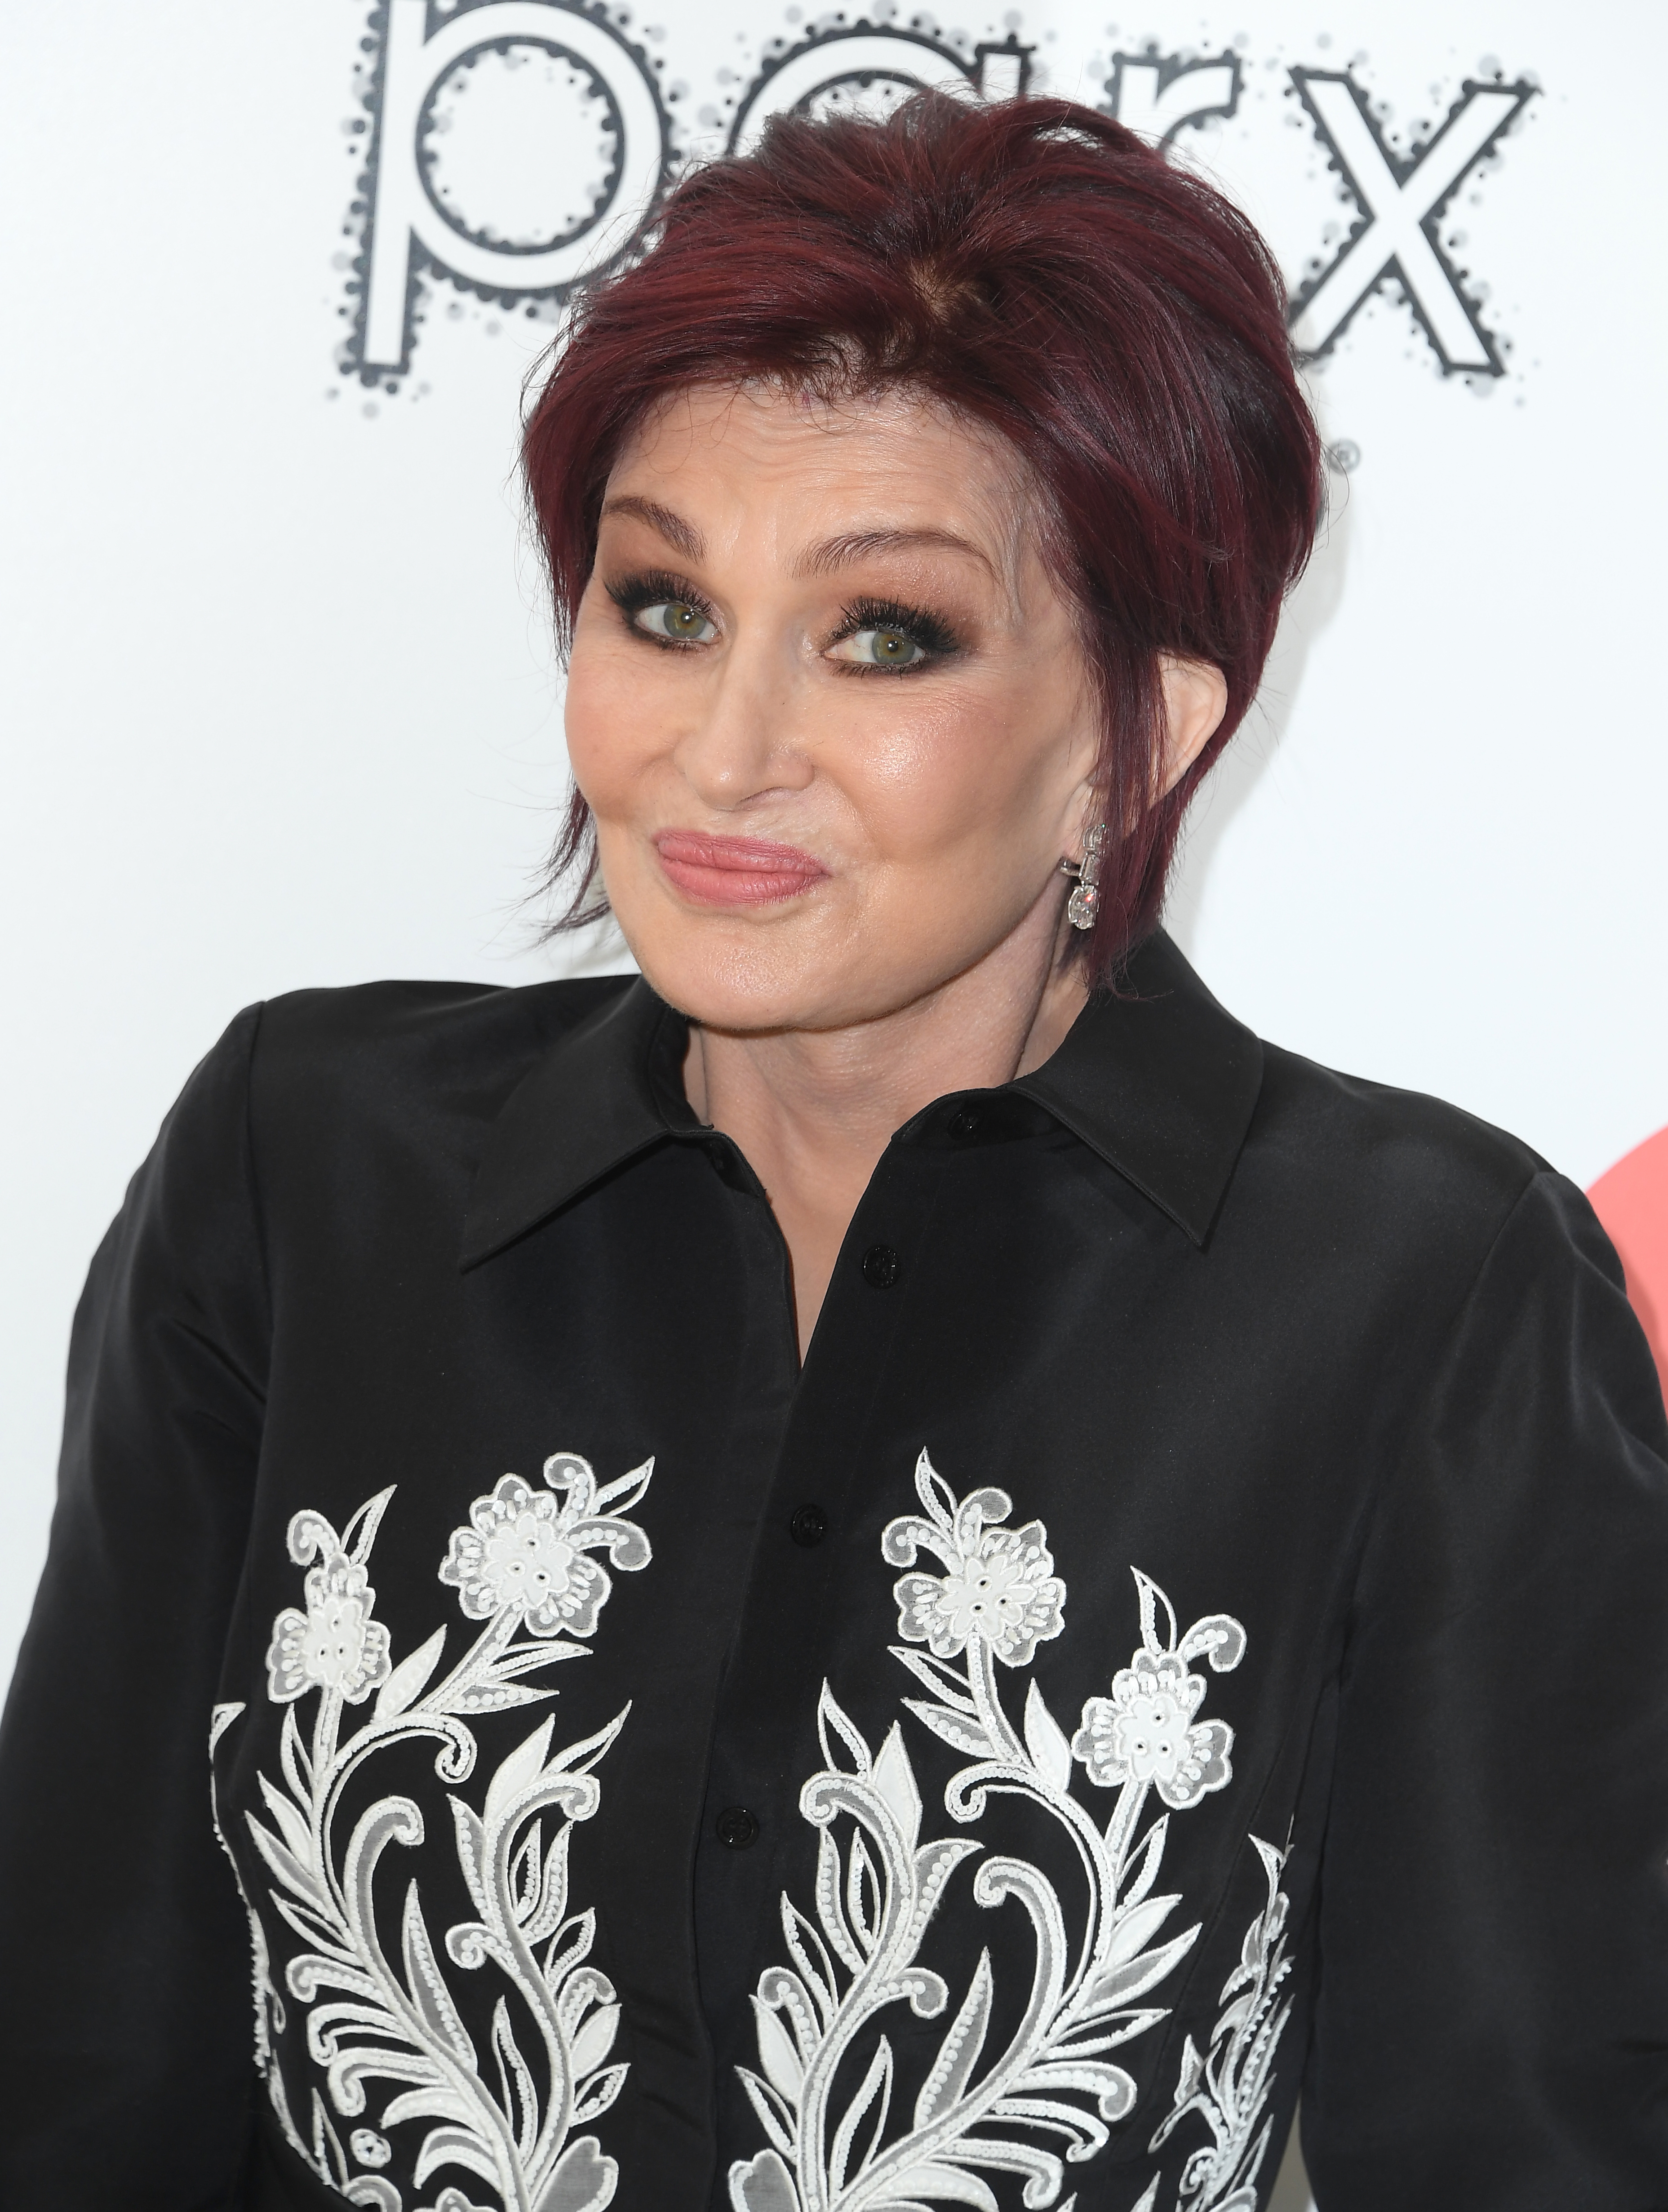 Sharon Osbourne at Elton John AIDS Foundation's 30th Annual Academy Awards Viewing Party in West Hollywood, California on March 27, 2022 | Source: Getty Images